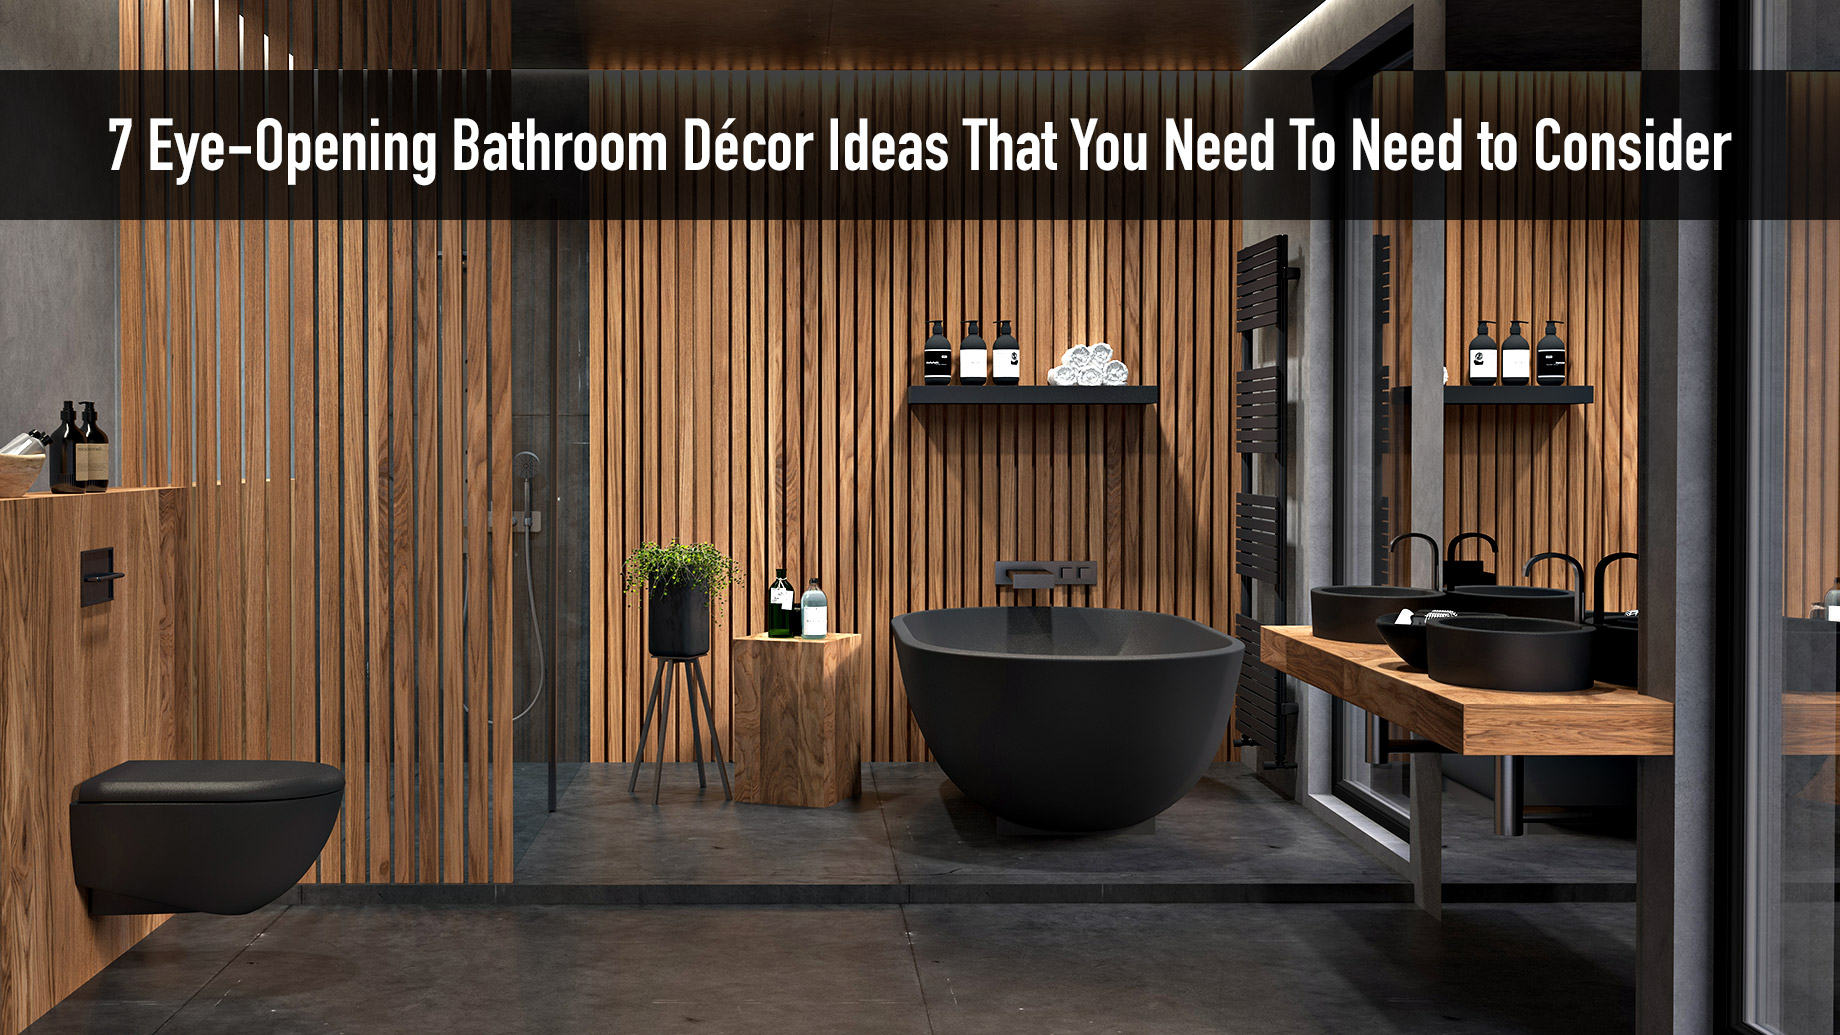 7 Eye-Opening Bathroom Décor Ideas That You Need To Need to Consider